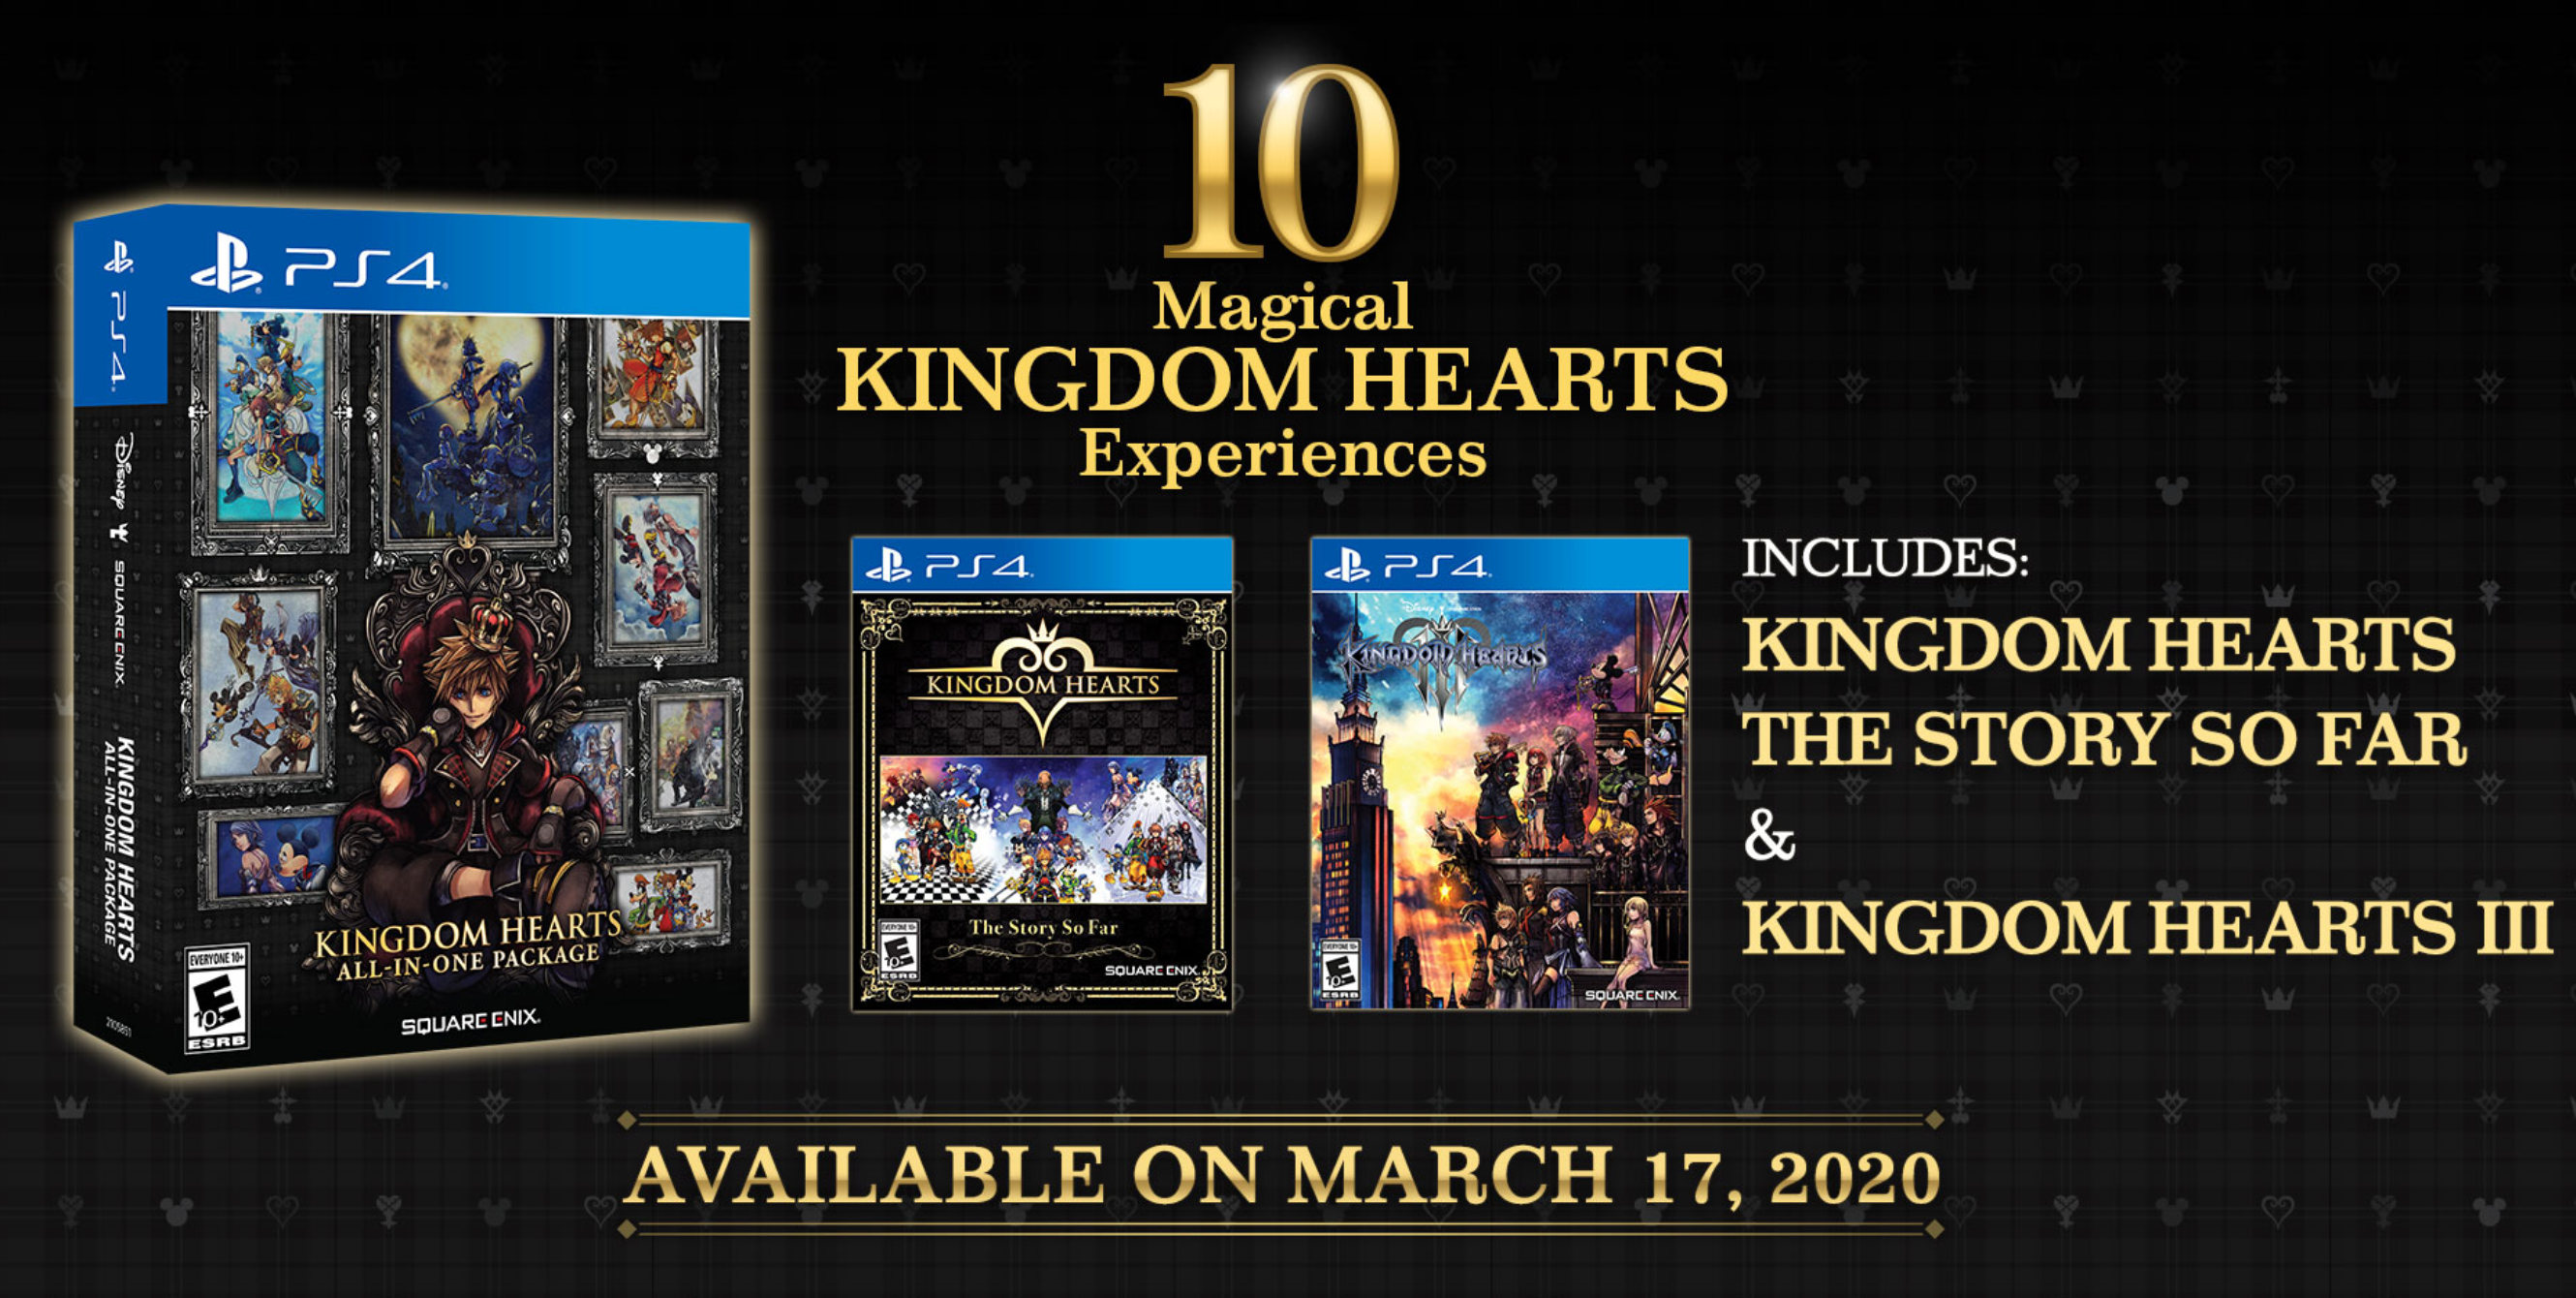 Kingdom Hearts All-in-One Package on PS4